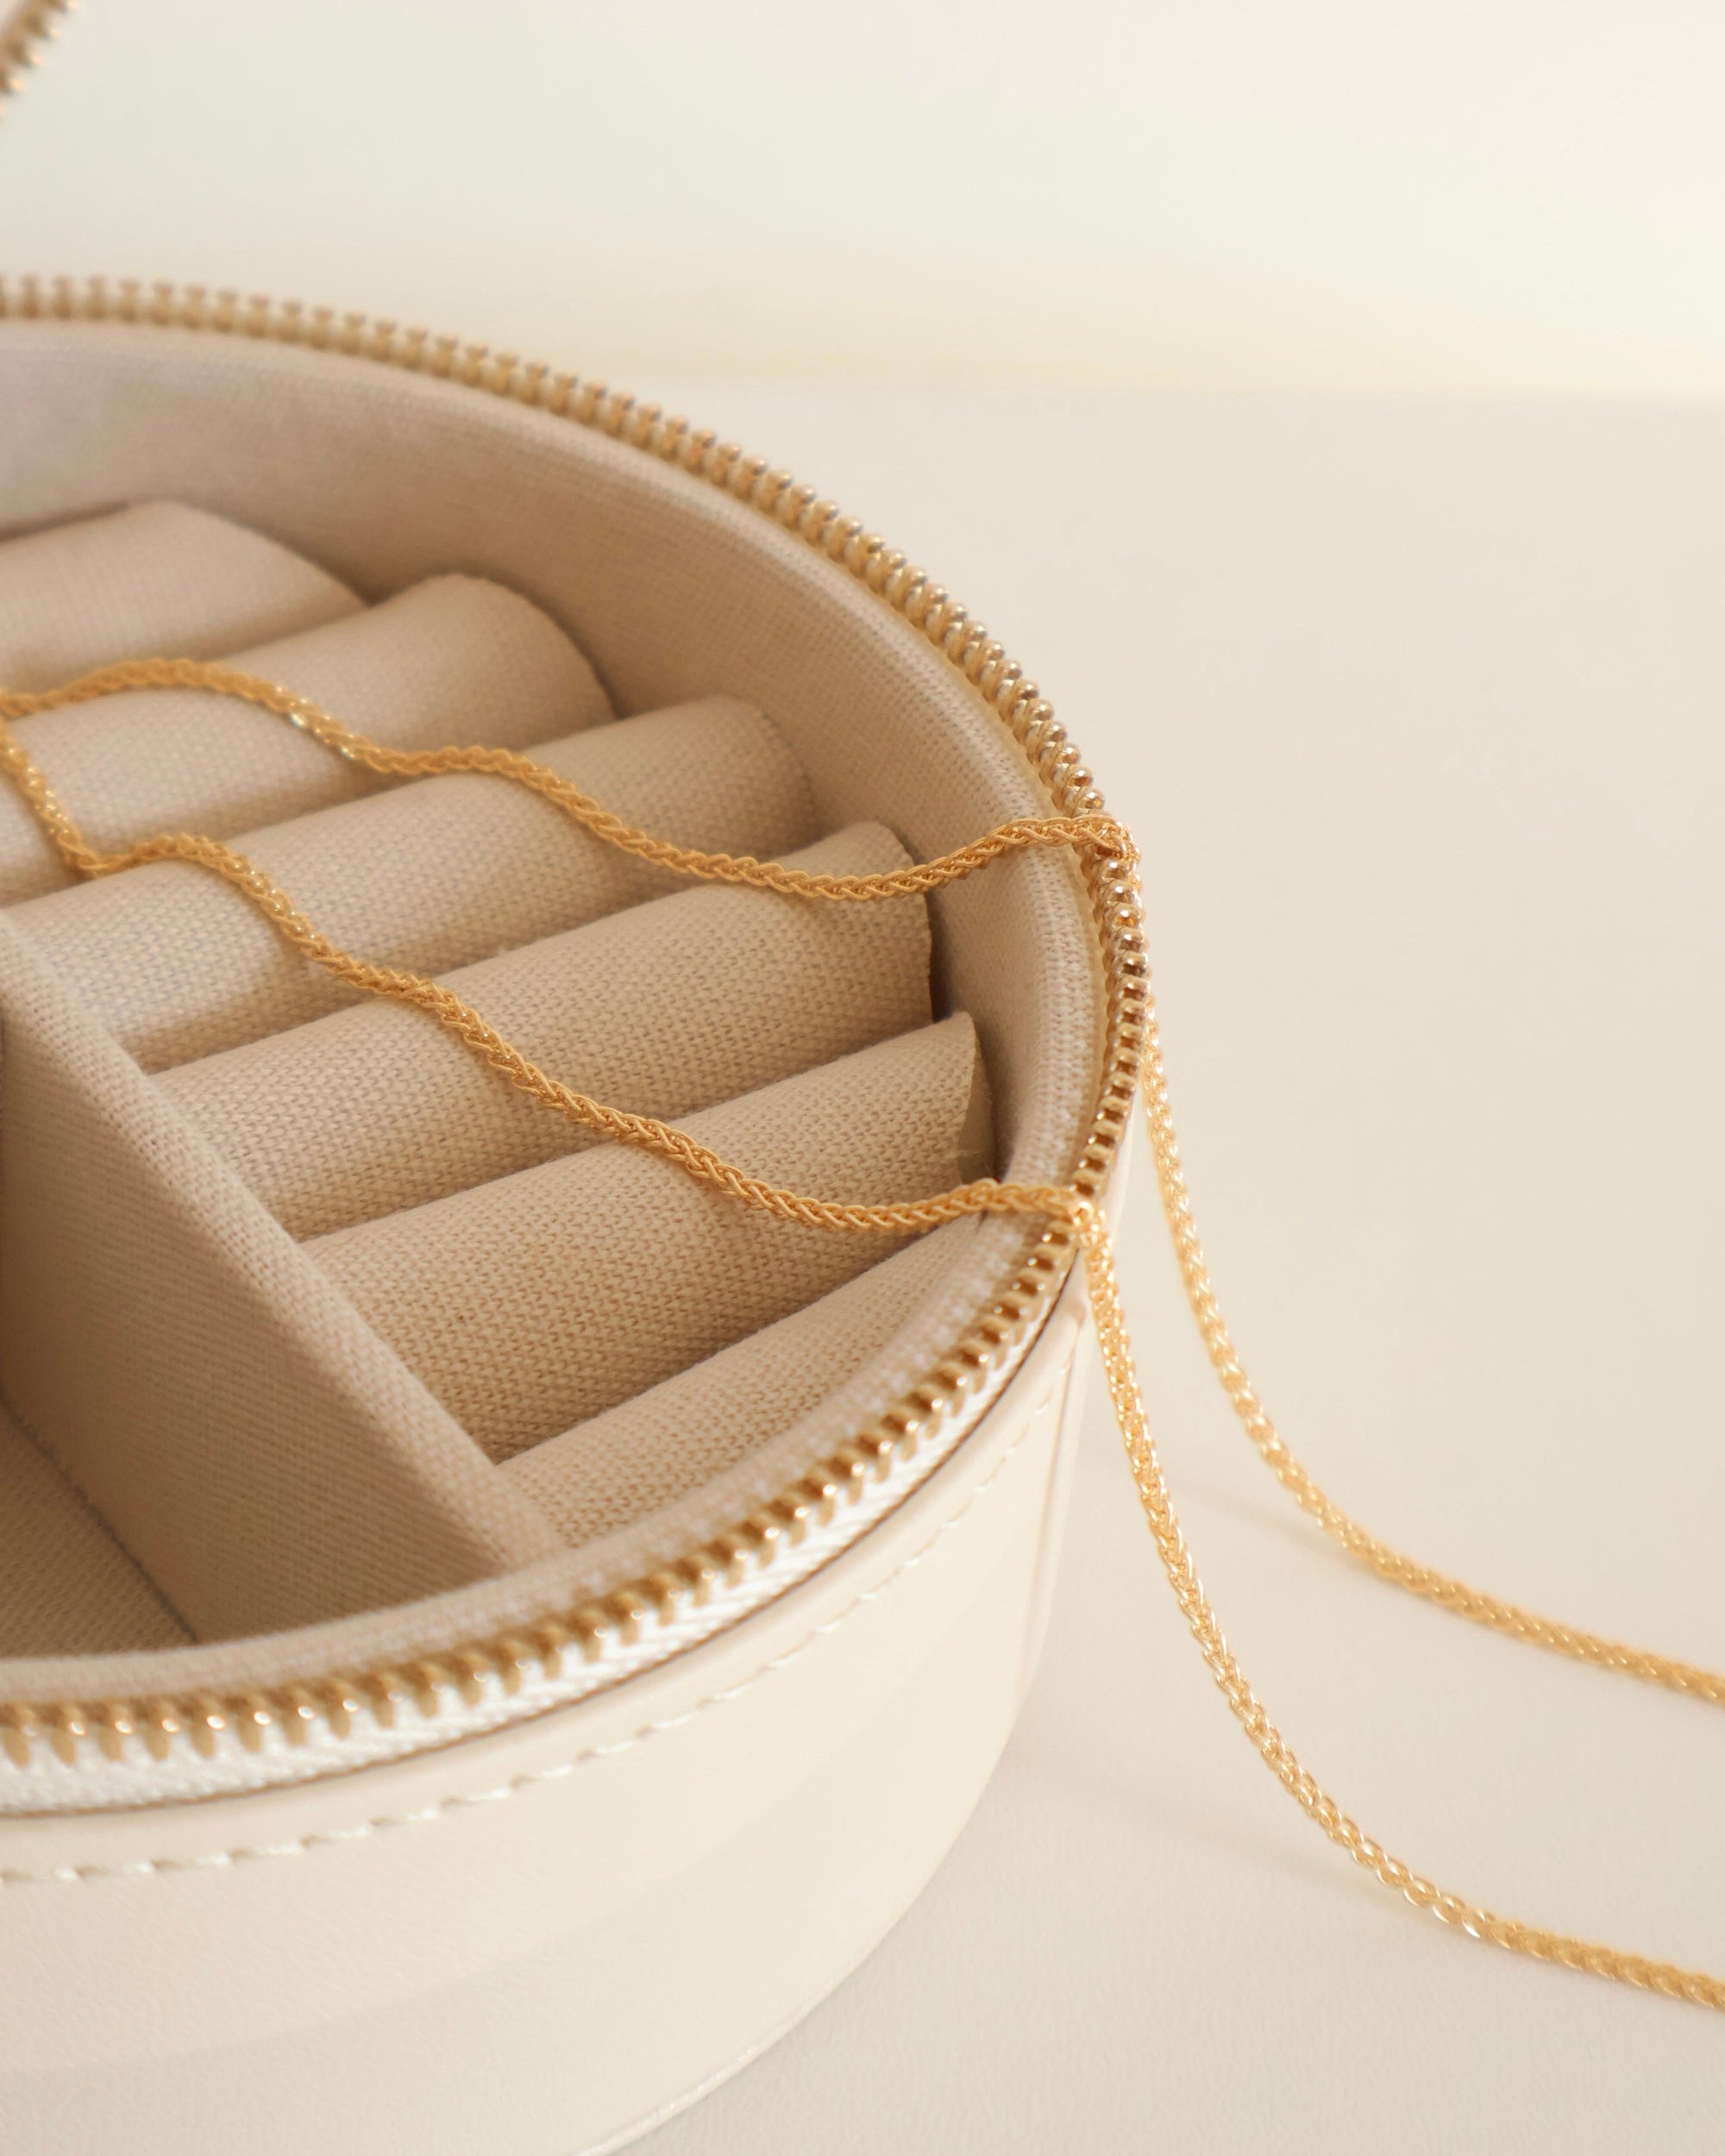 aesthetic round jewelry box with a 14 karat gold necklace made from wheat chain